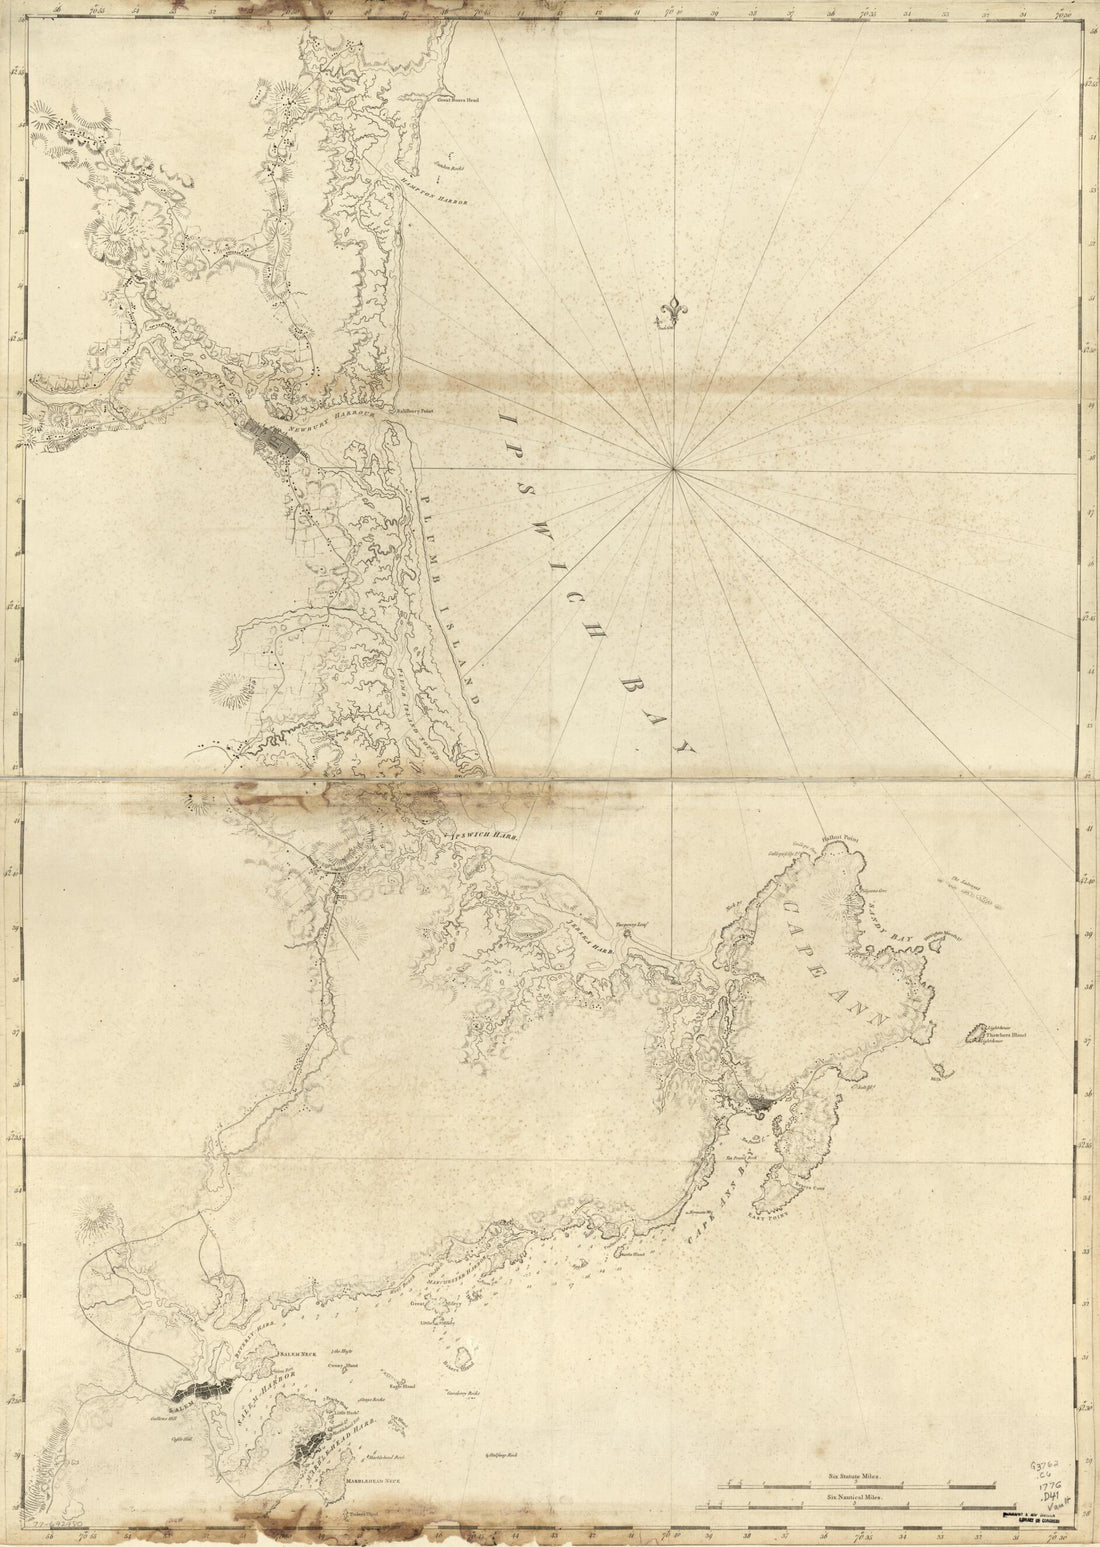 This old map of Coast of New Hampshire and Massachusetts from Great Boars Head to Marblehead Harbor from 1781 was created by Joseph F. W. (Joseph Frederick Wallet) Des Barres in 1781